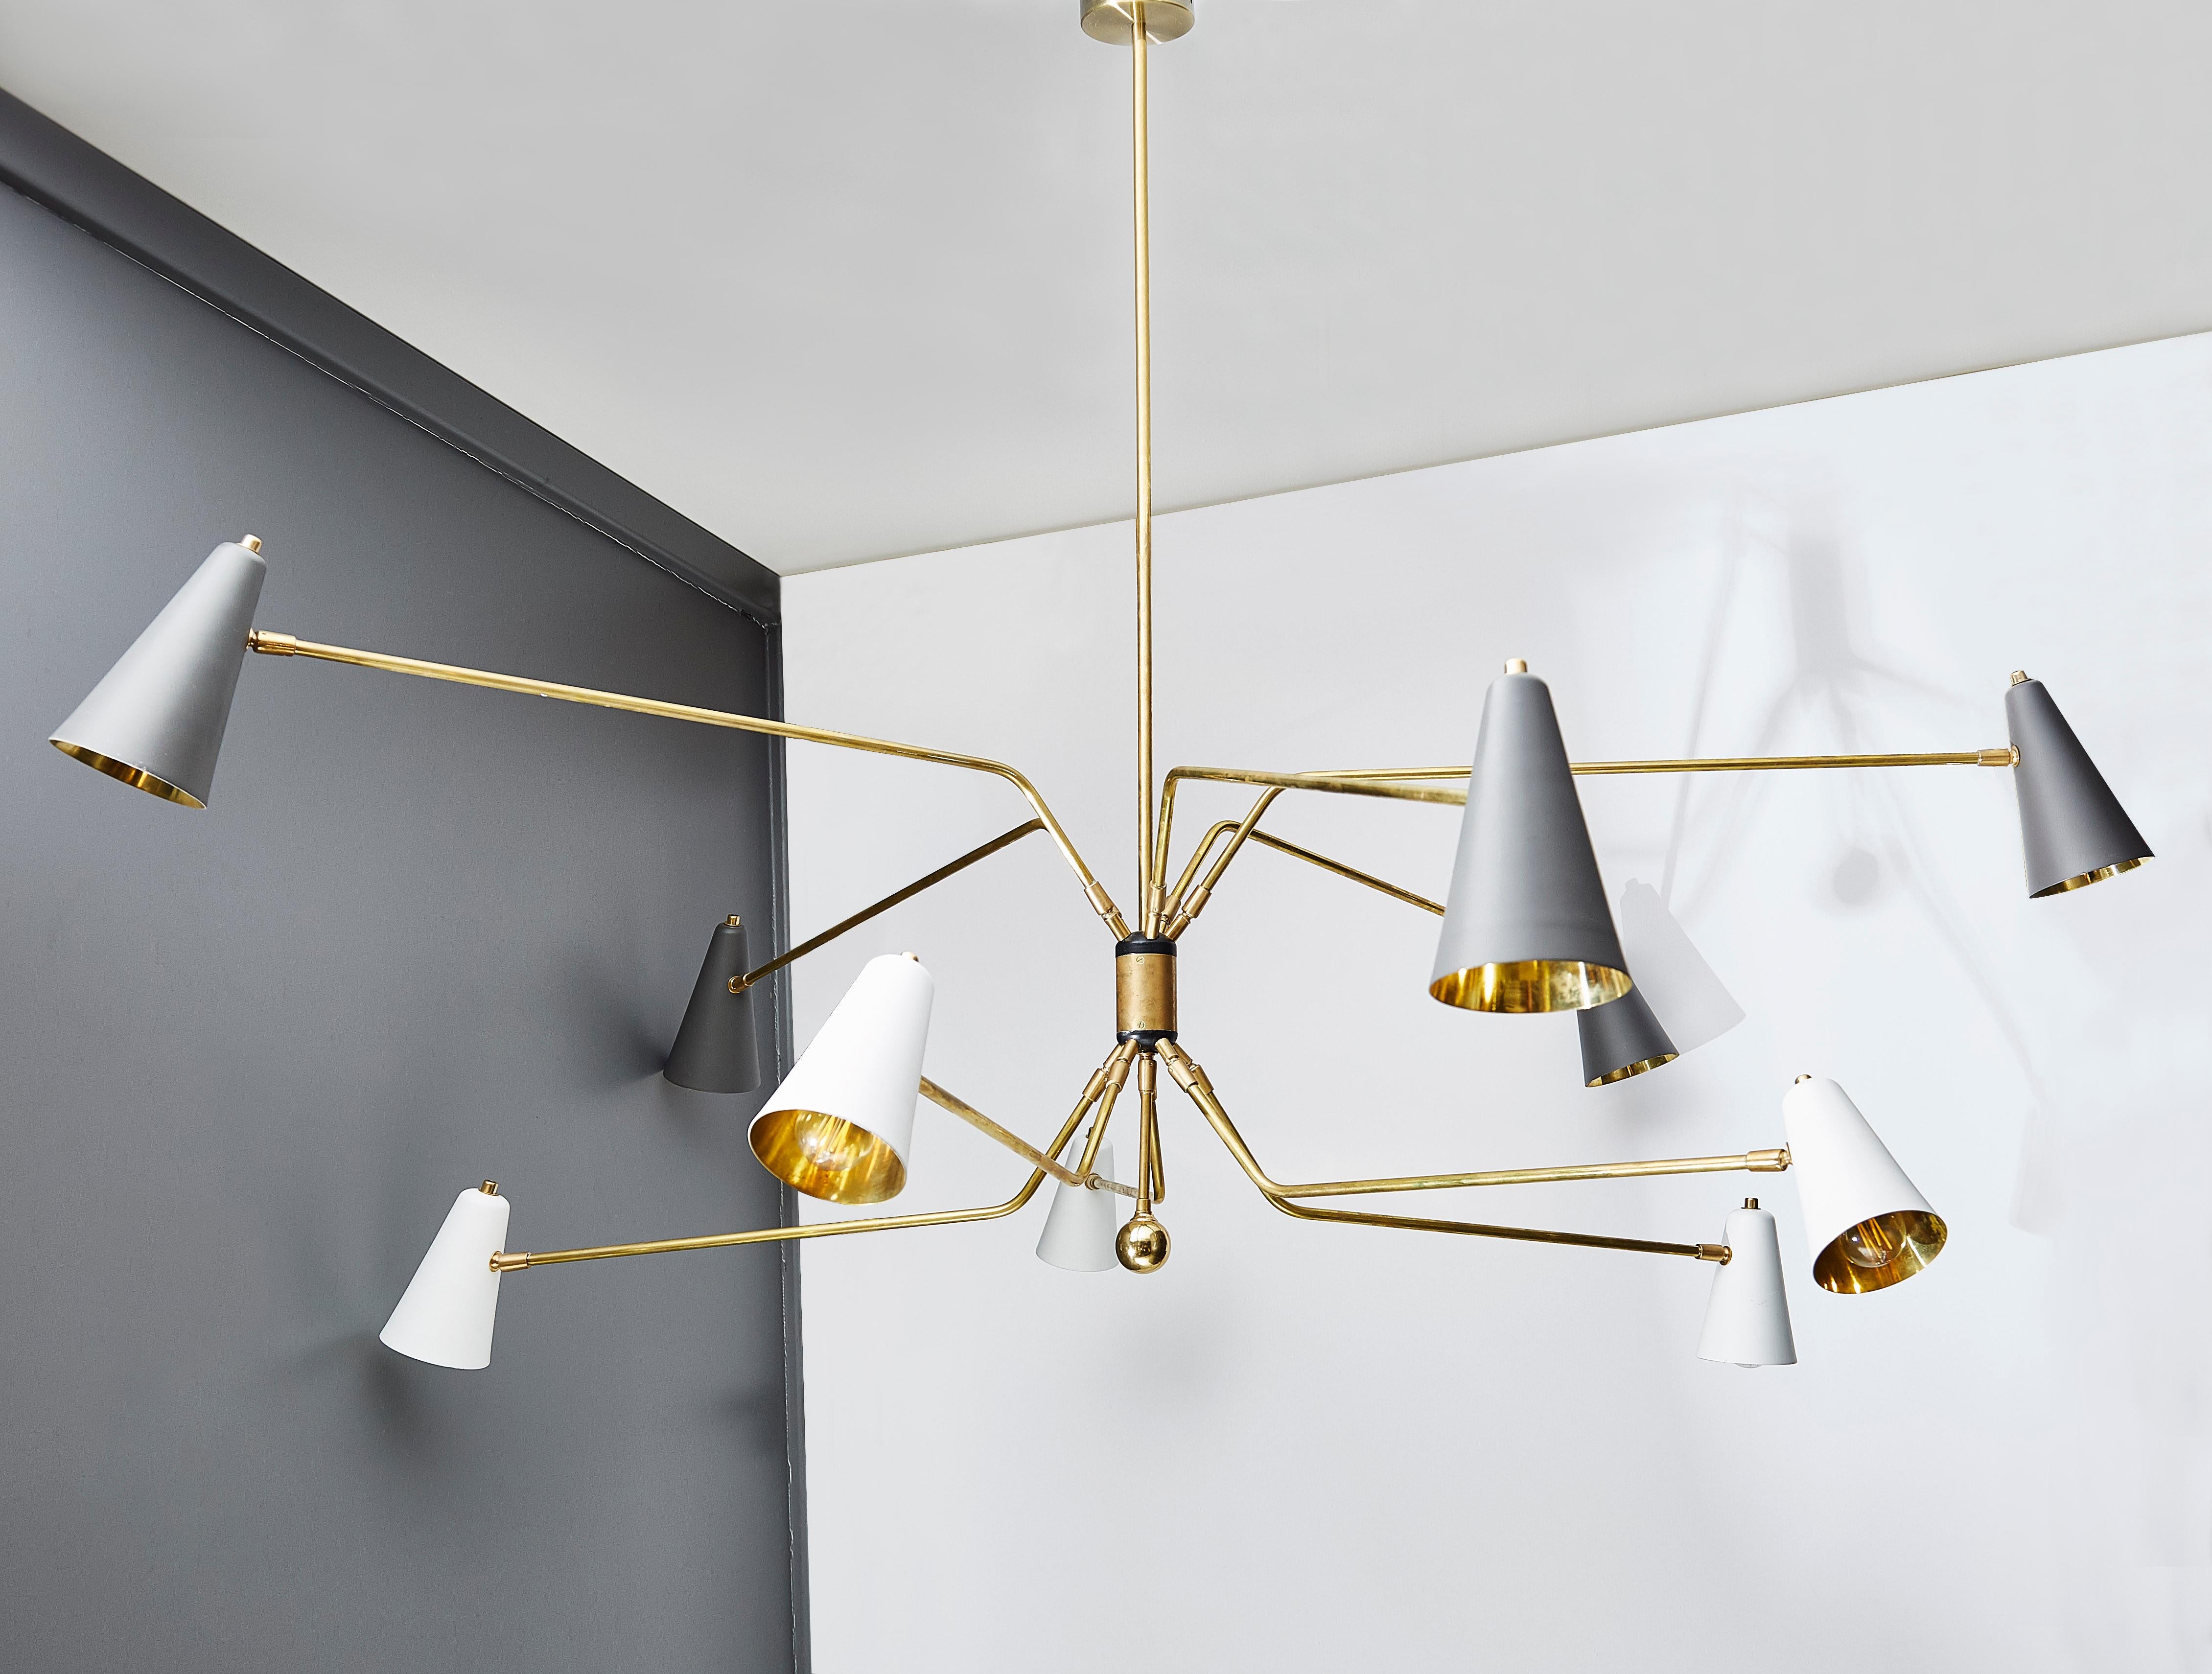 Midcentury style chandelier made exclusively for Glustin Luminaires, ten adjustable arms on two levels each holding a metal cone painted in white or grey.